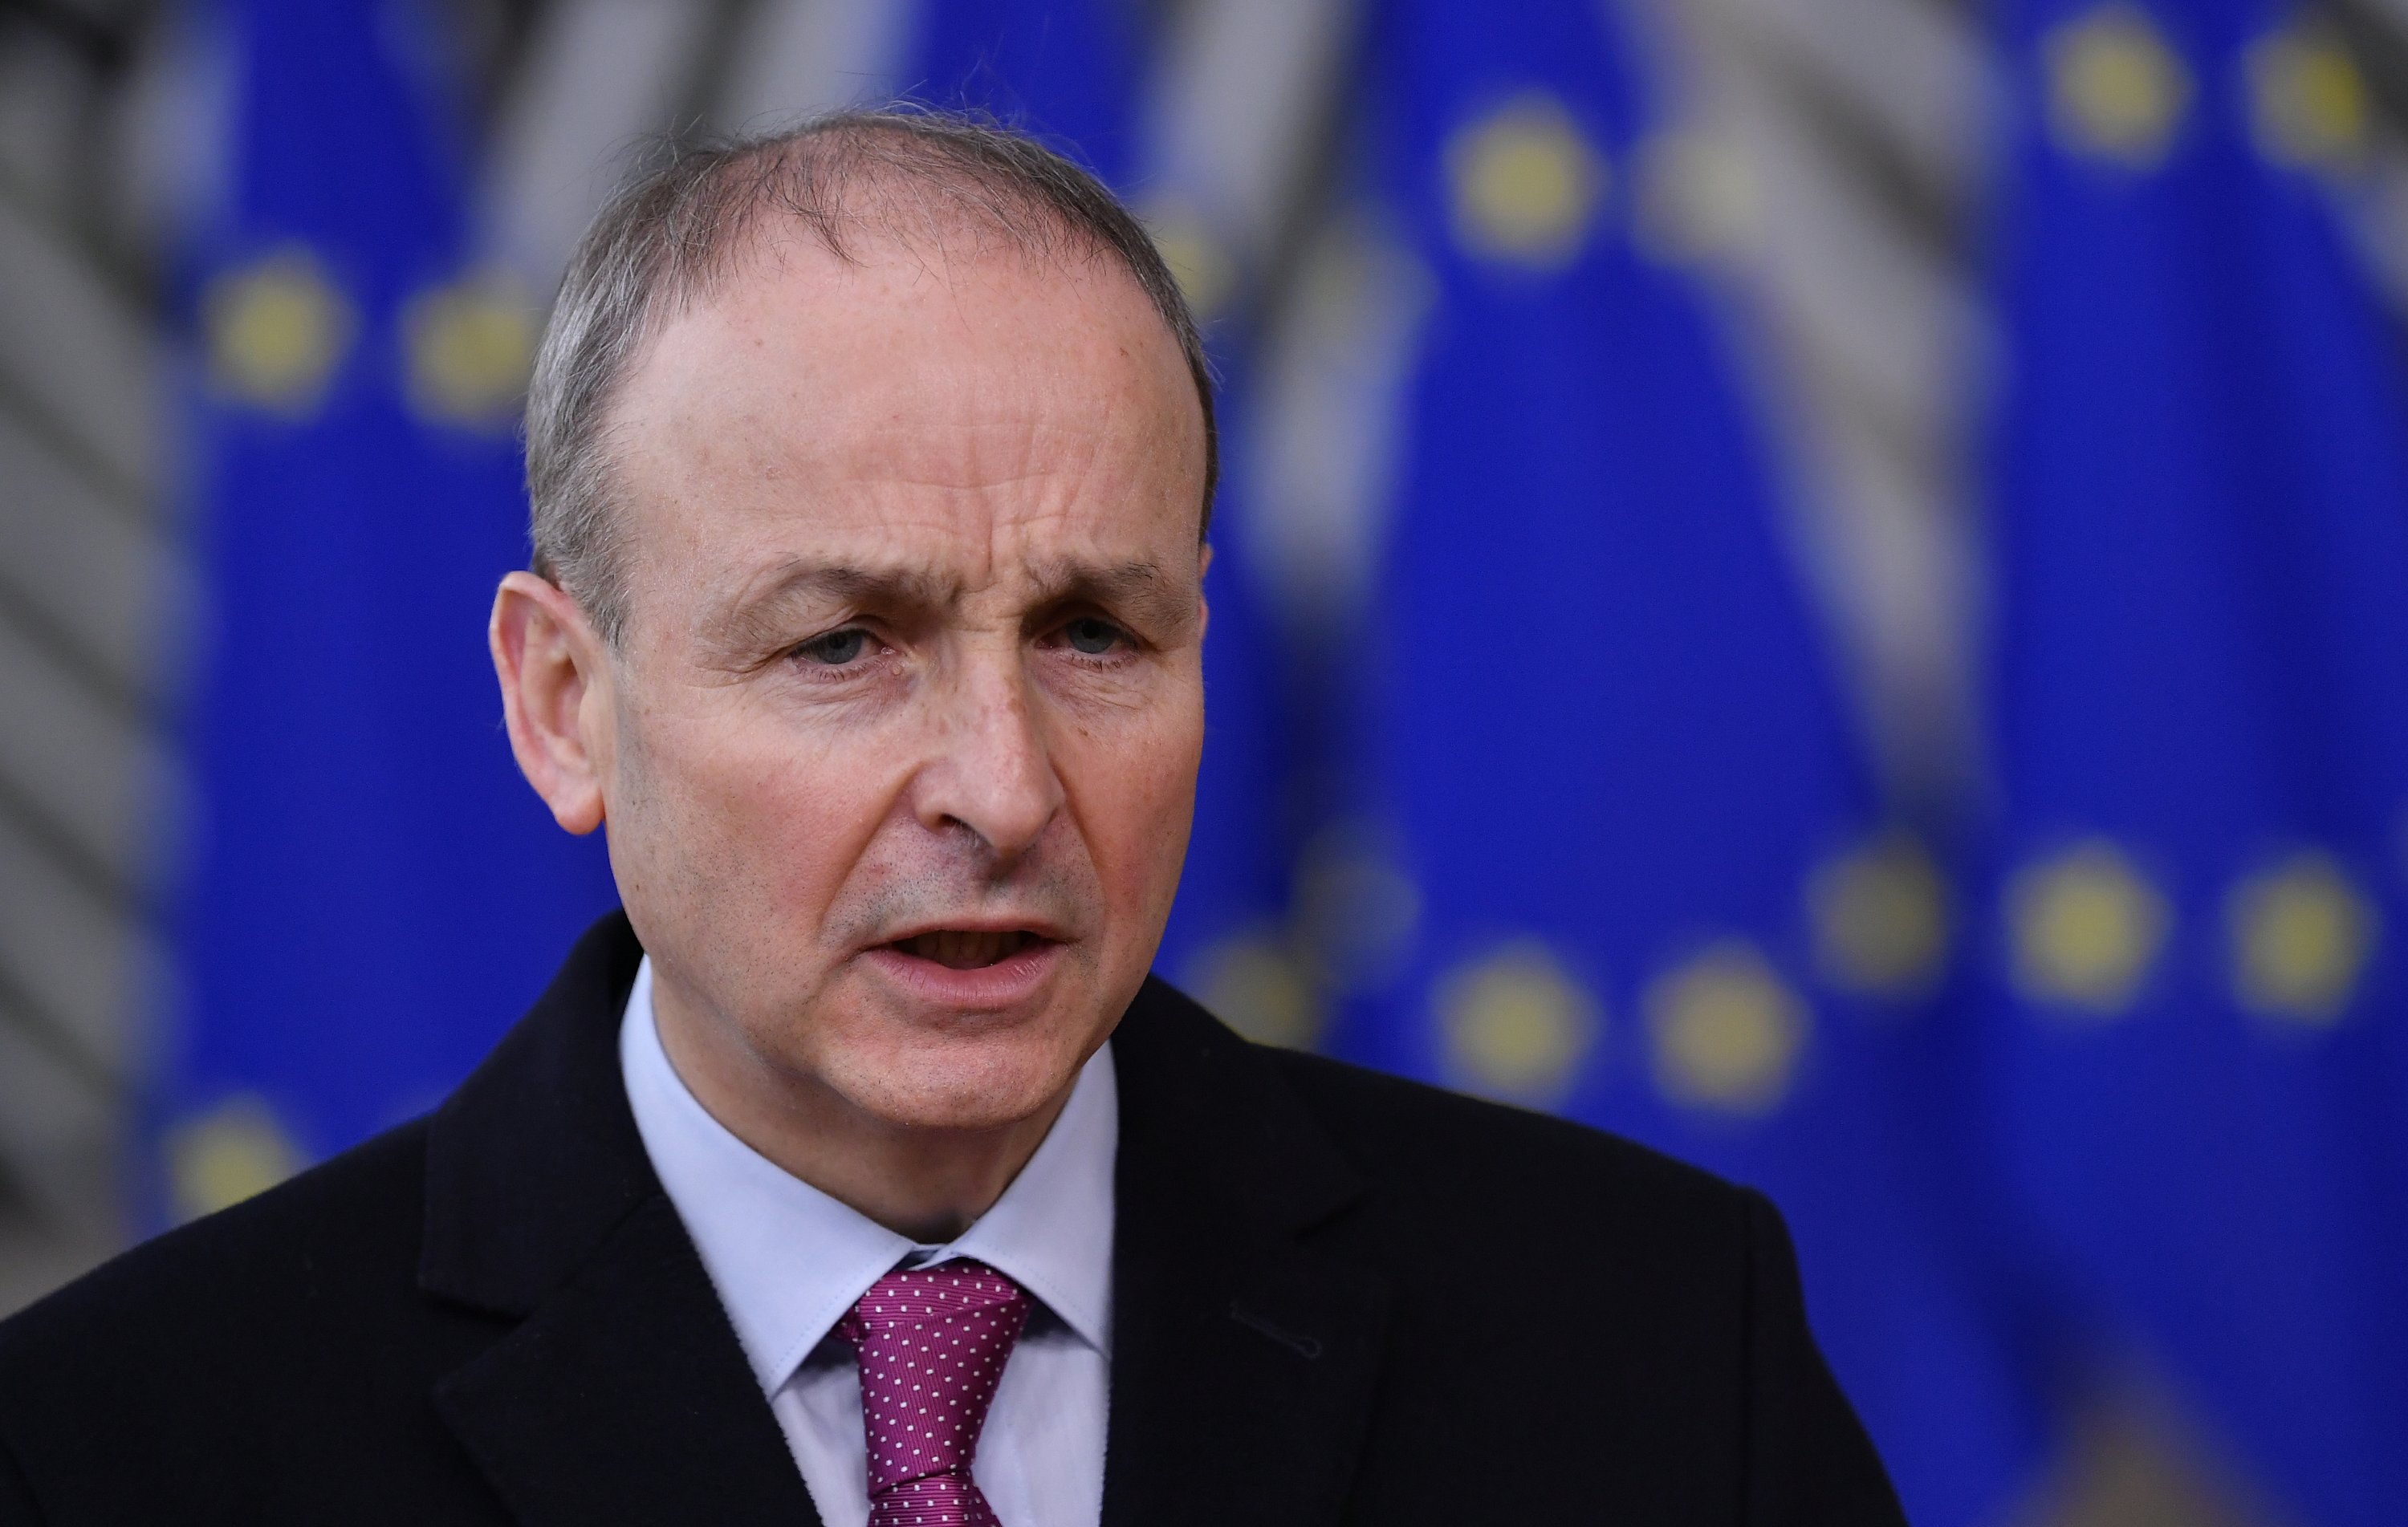 Irish Prime Minister regrets ‘deep wrong’ homes of unmarried mothers